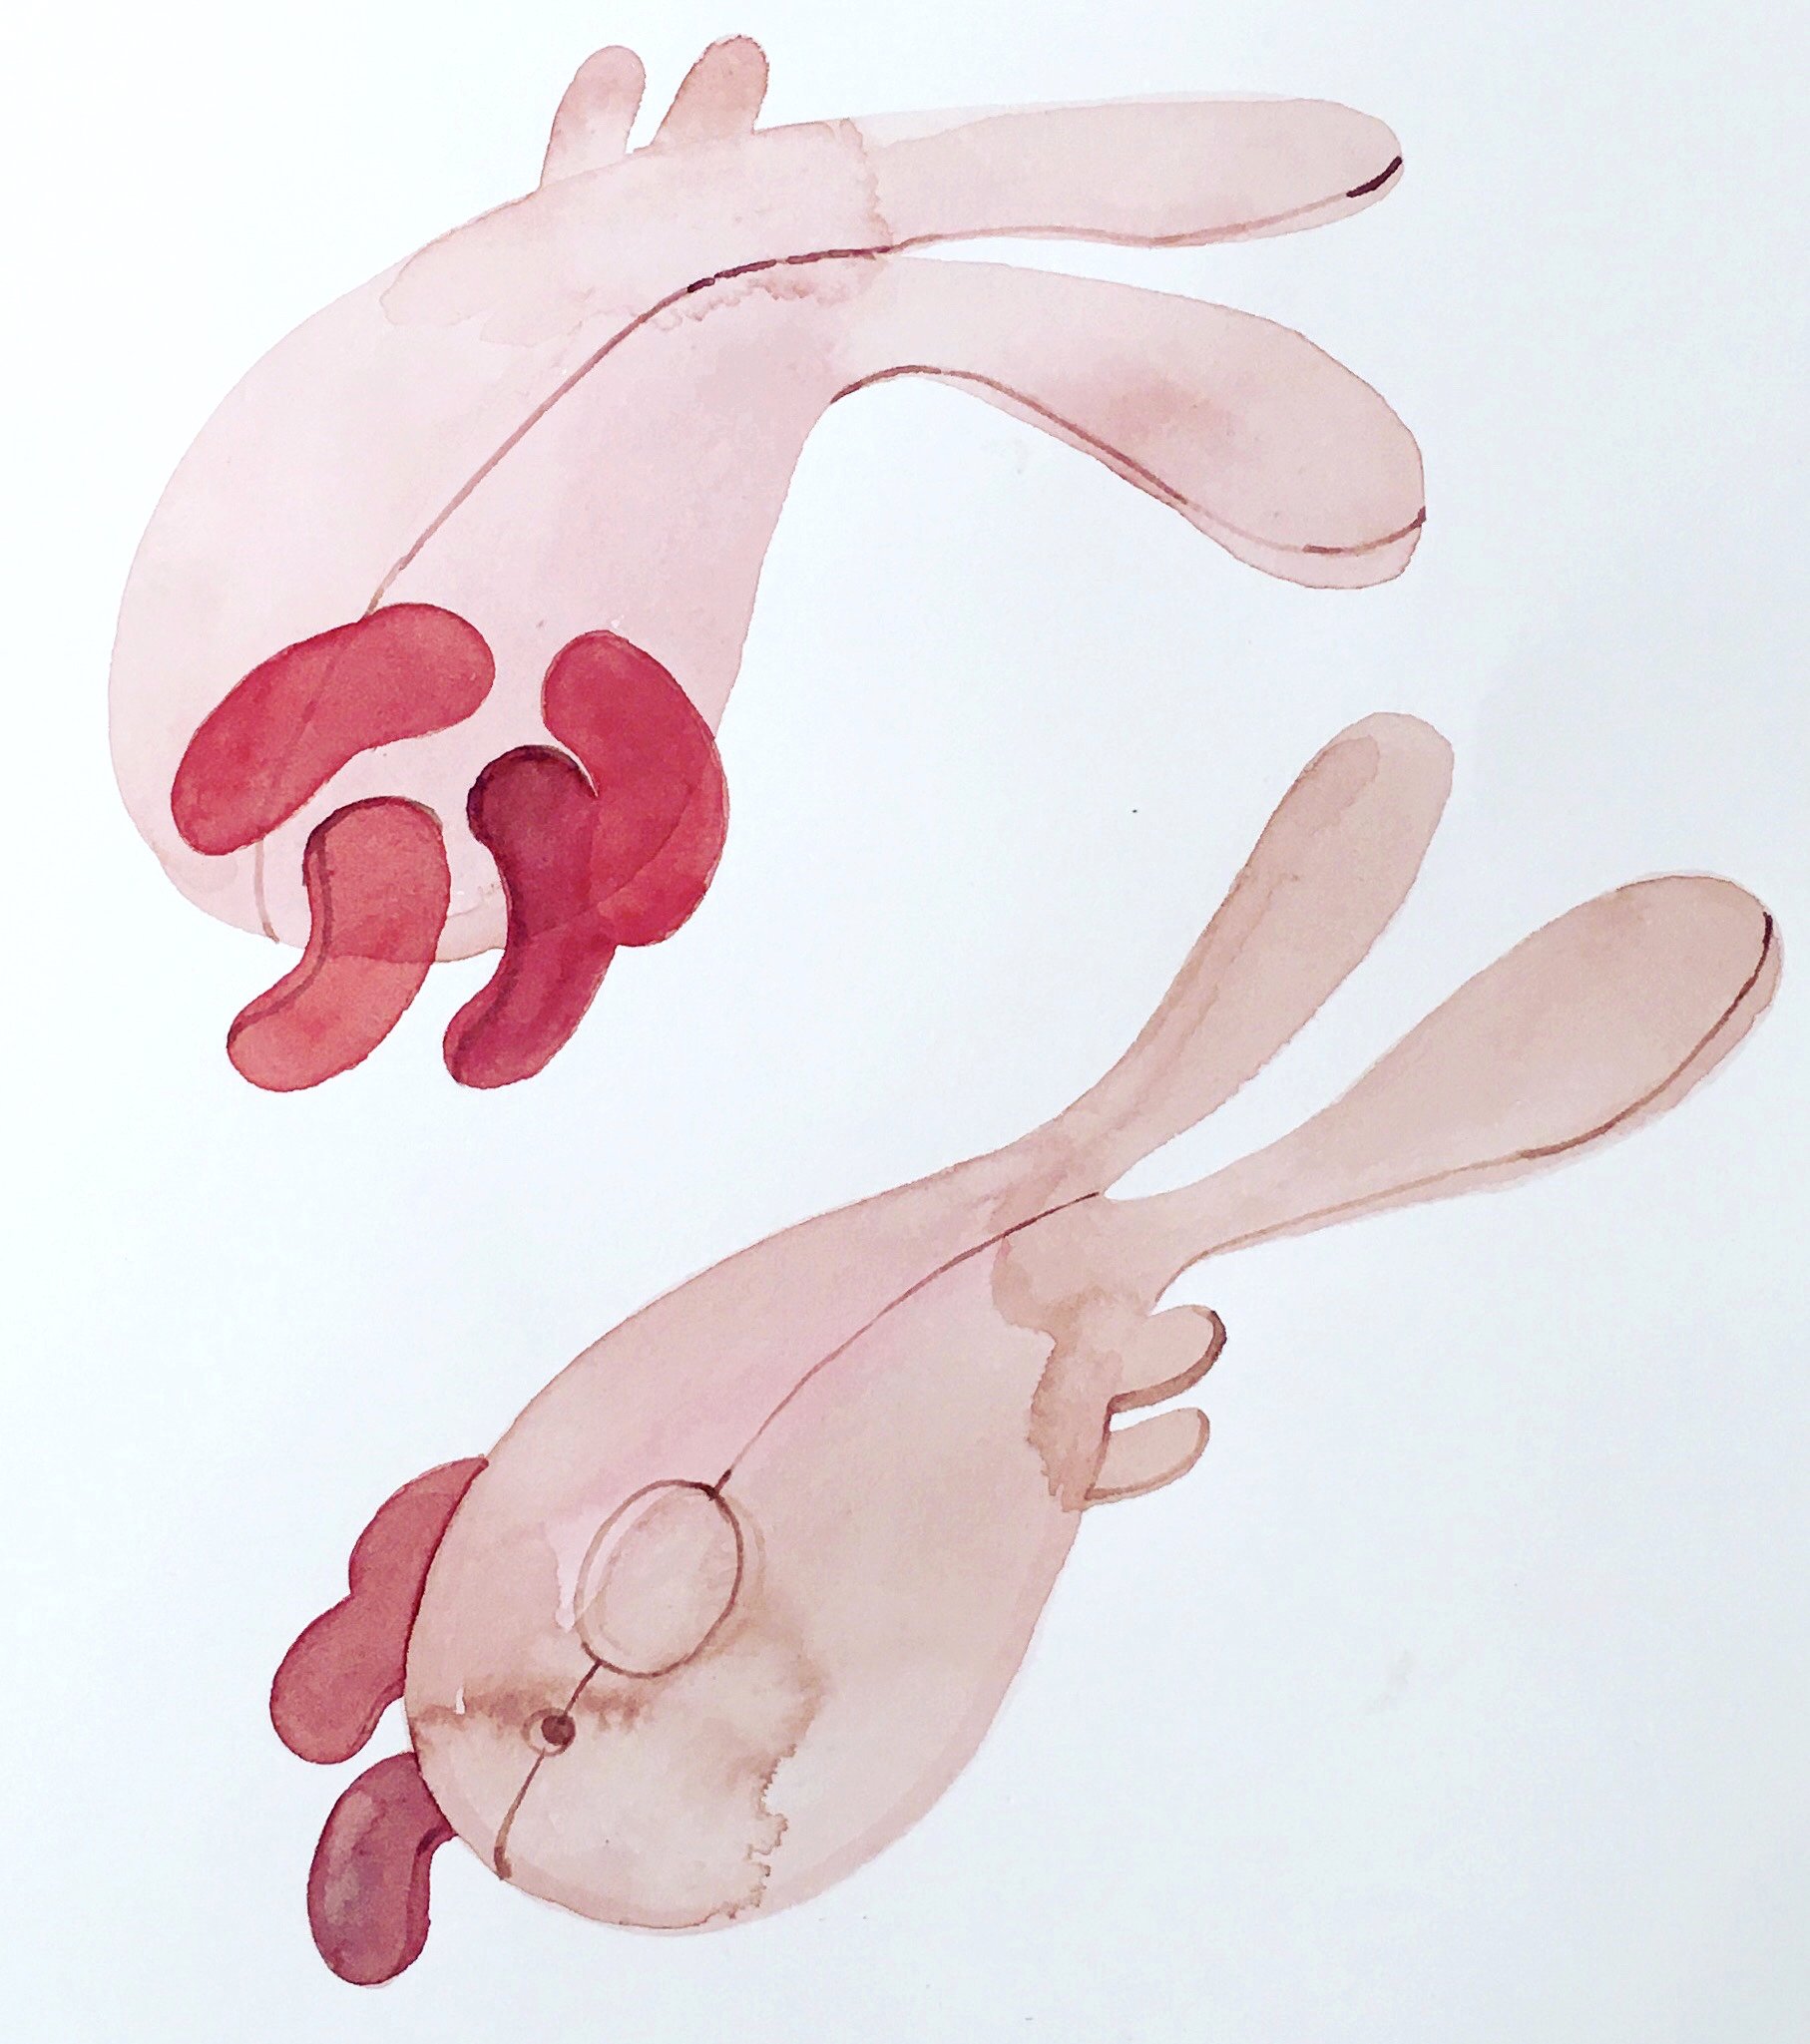   Sew your own Bunny : Kit number 1,  2020  Watercolour on paper, 21 x 29 cm 